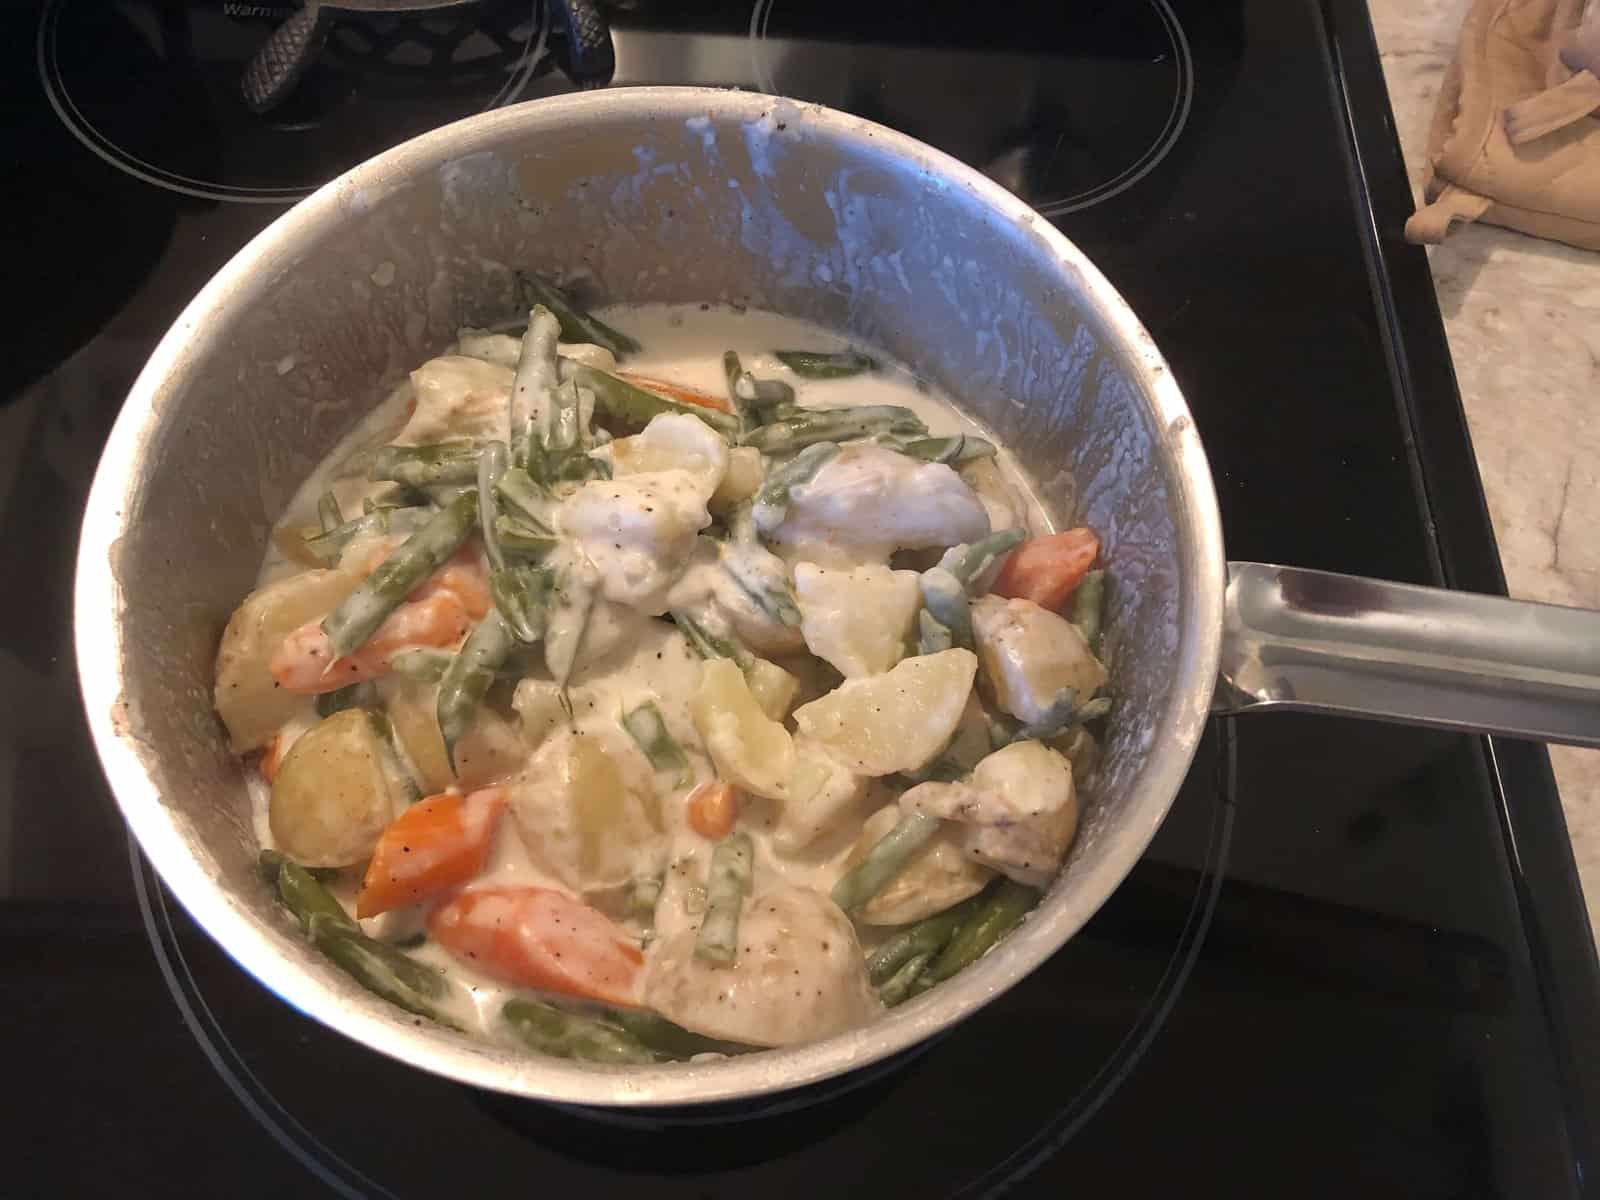 potatoes, carrots and green beans in a creamy sauce